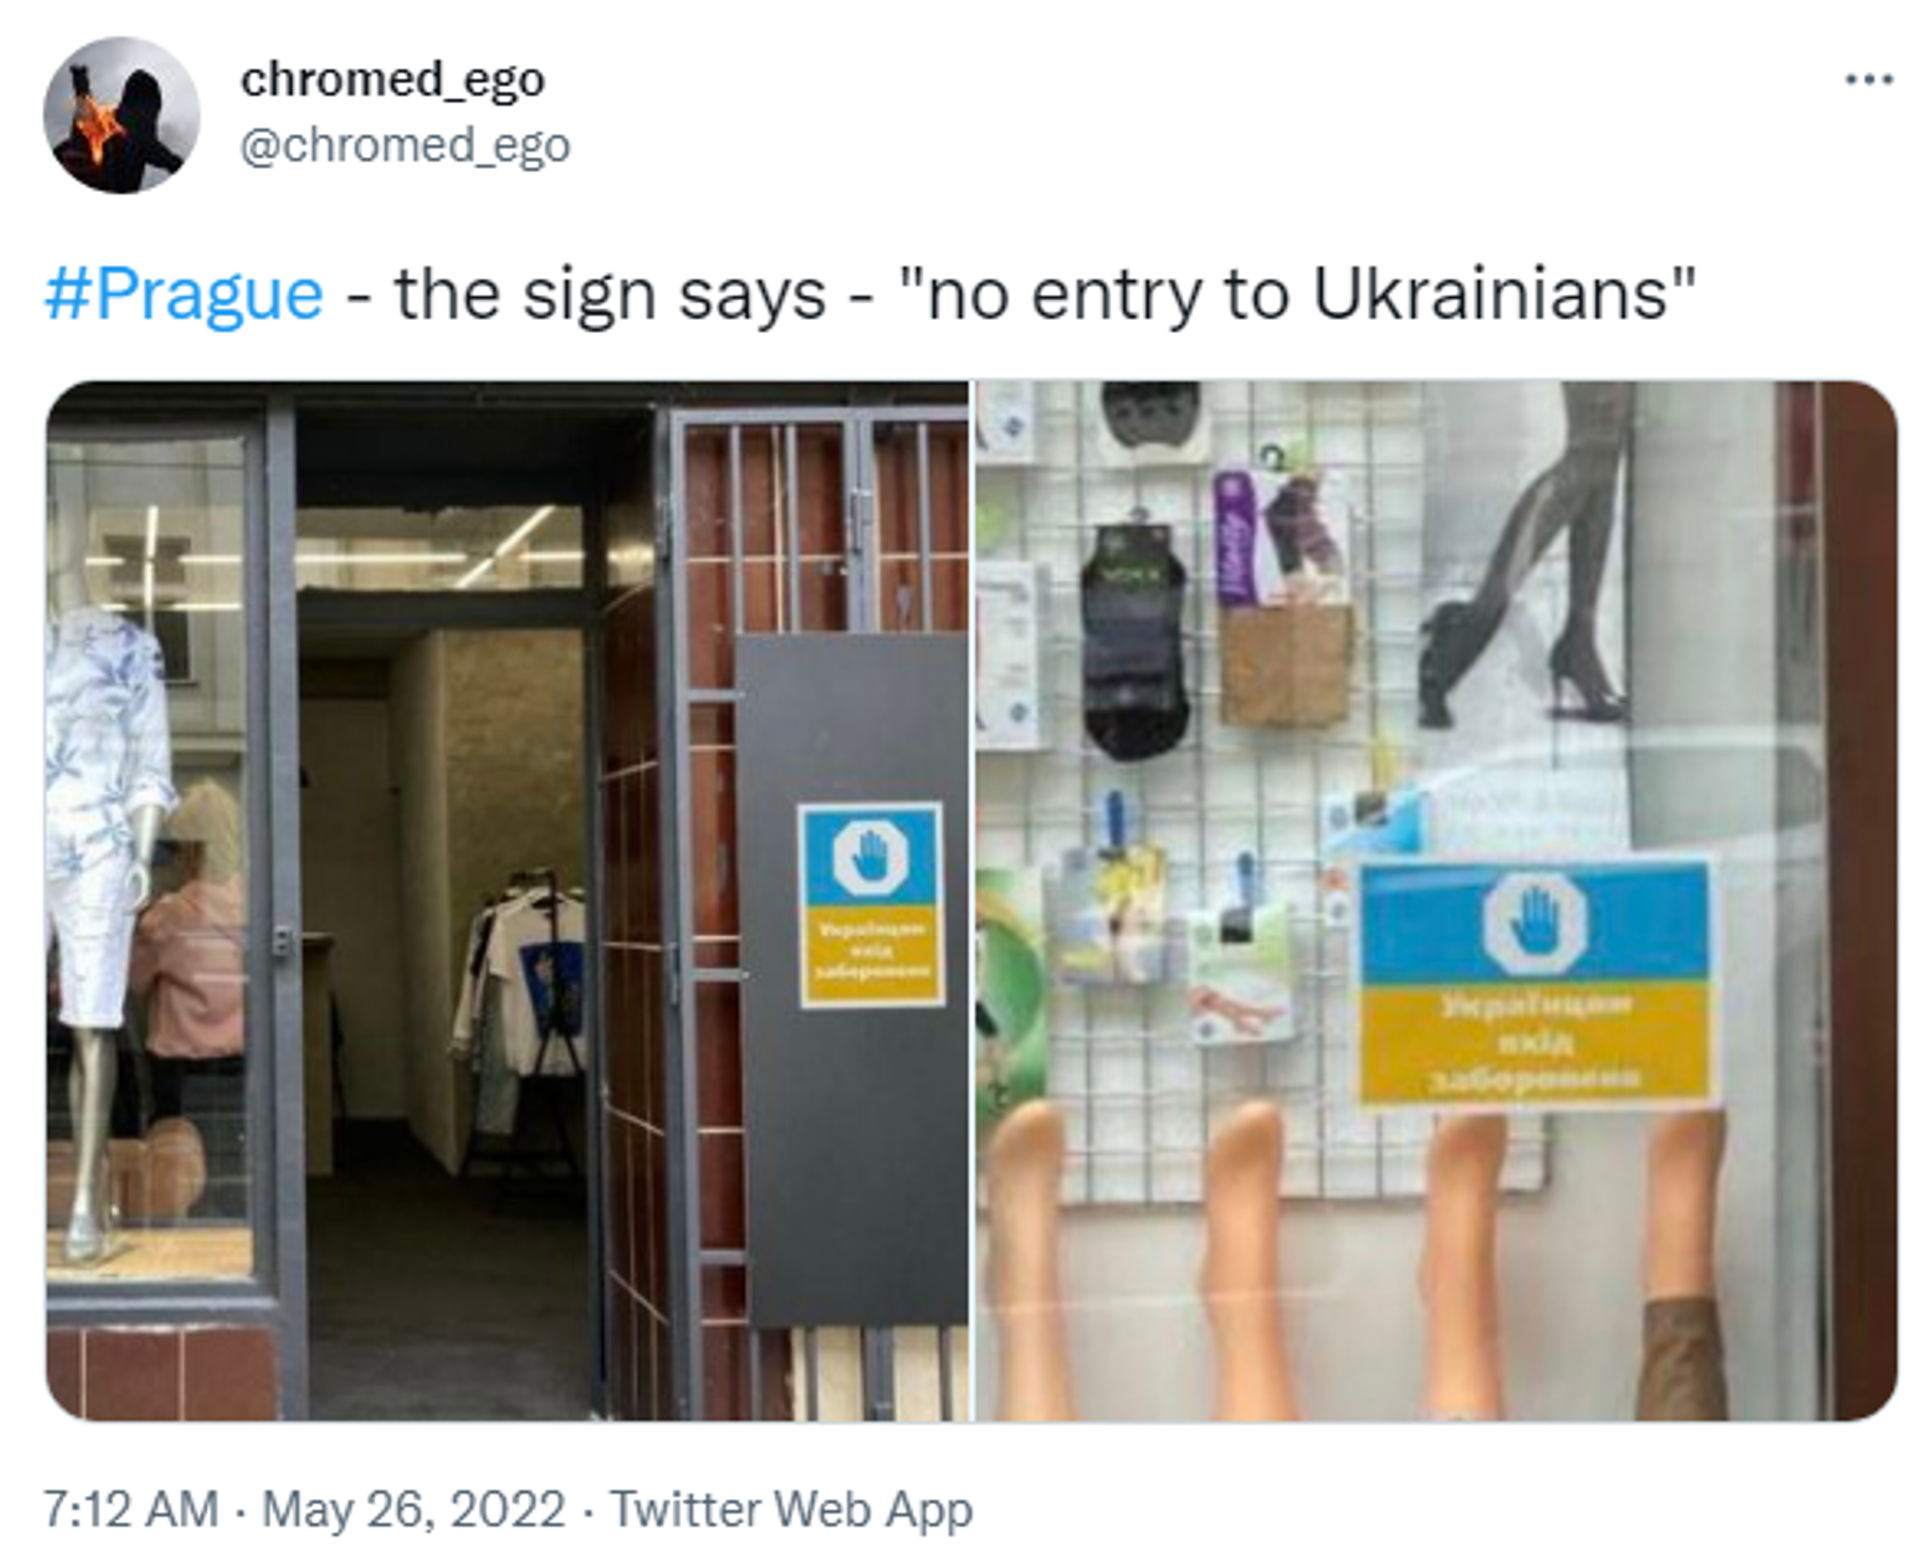 Tweeted images of No entry to Ukrainians signs outside shops in the Czech capital Prague - Sputnik International, 1920, 31.10.2022